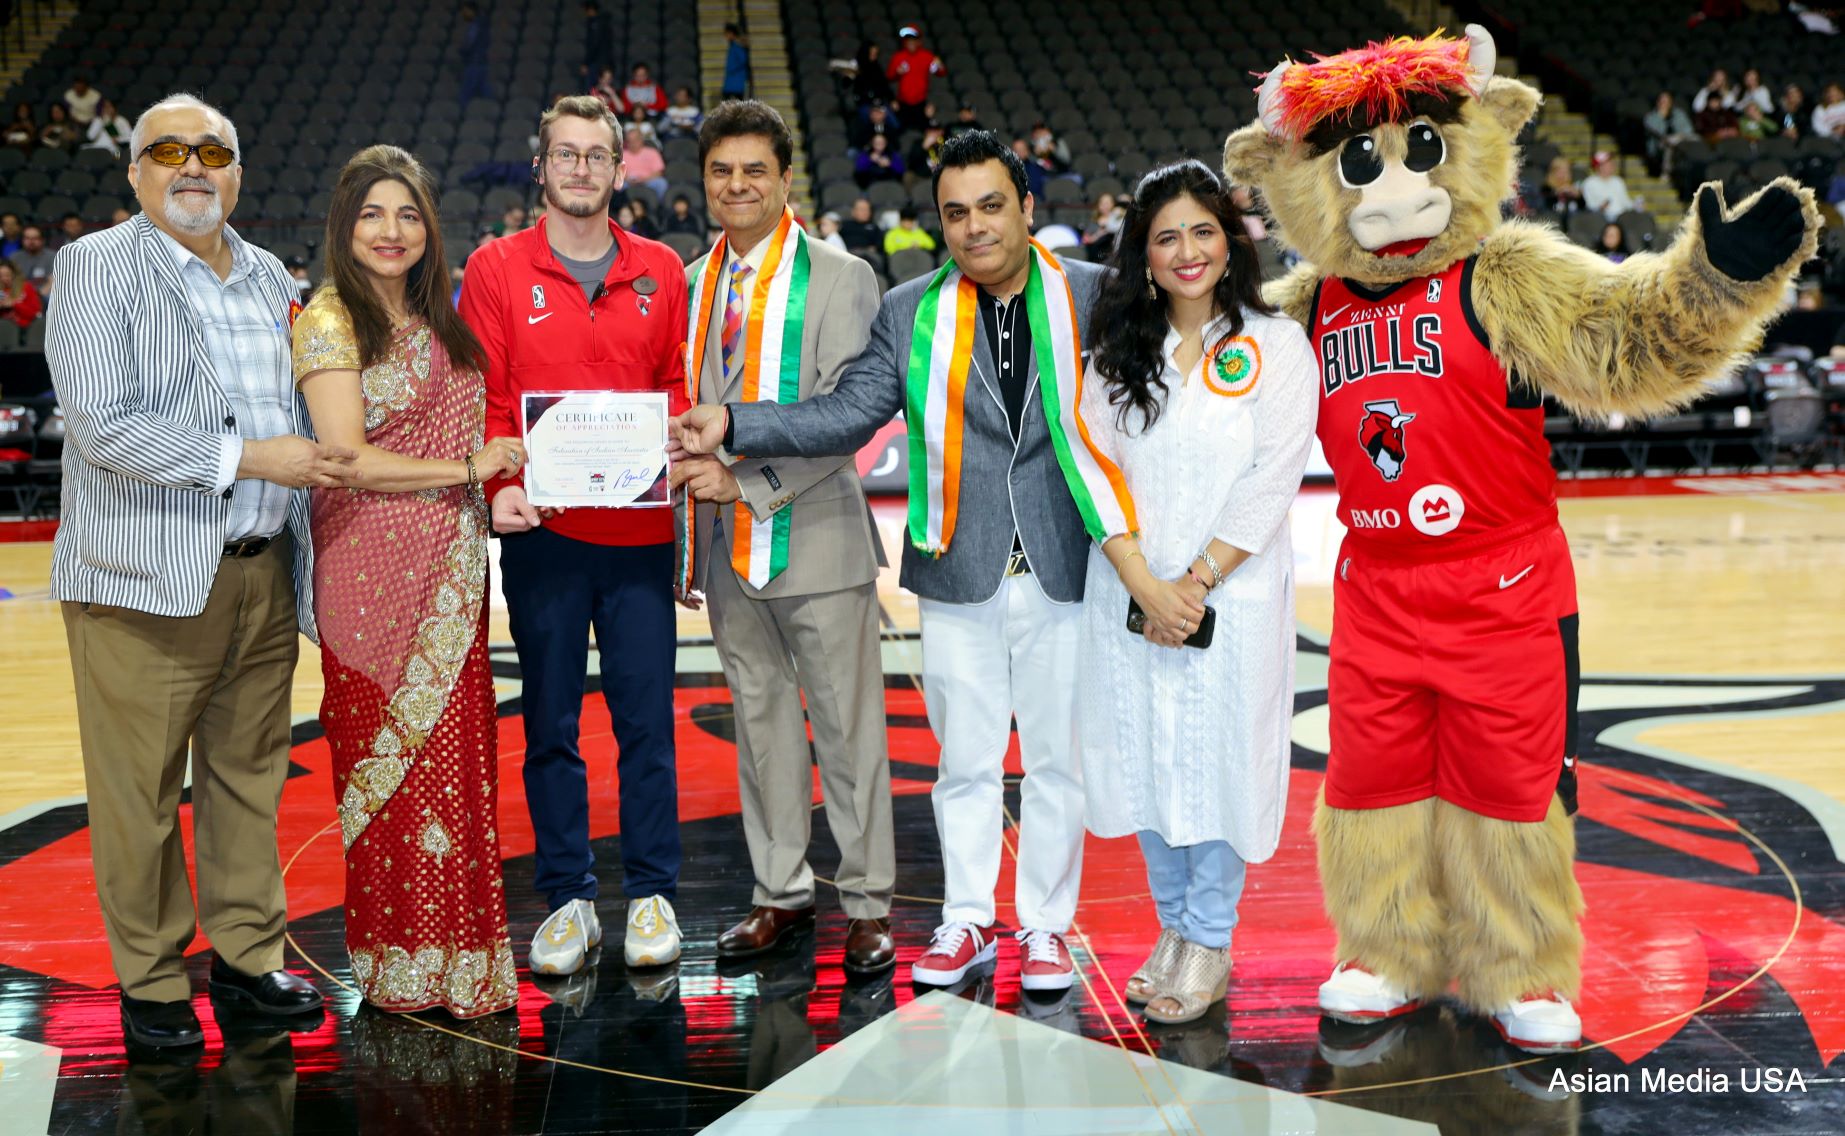 FIA – Chicago hosts its spectacular 6th Indian Heritage Night along with the Windy City Bulls at NOW Arena